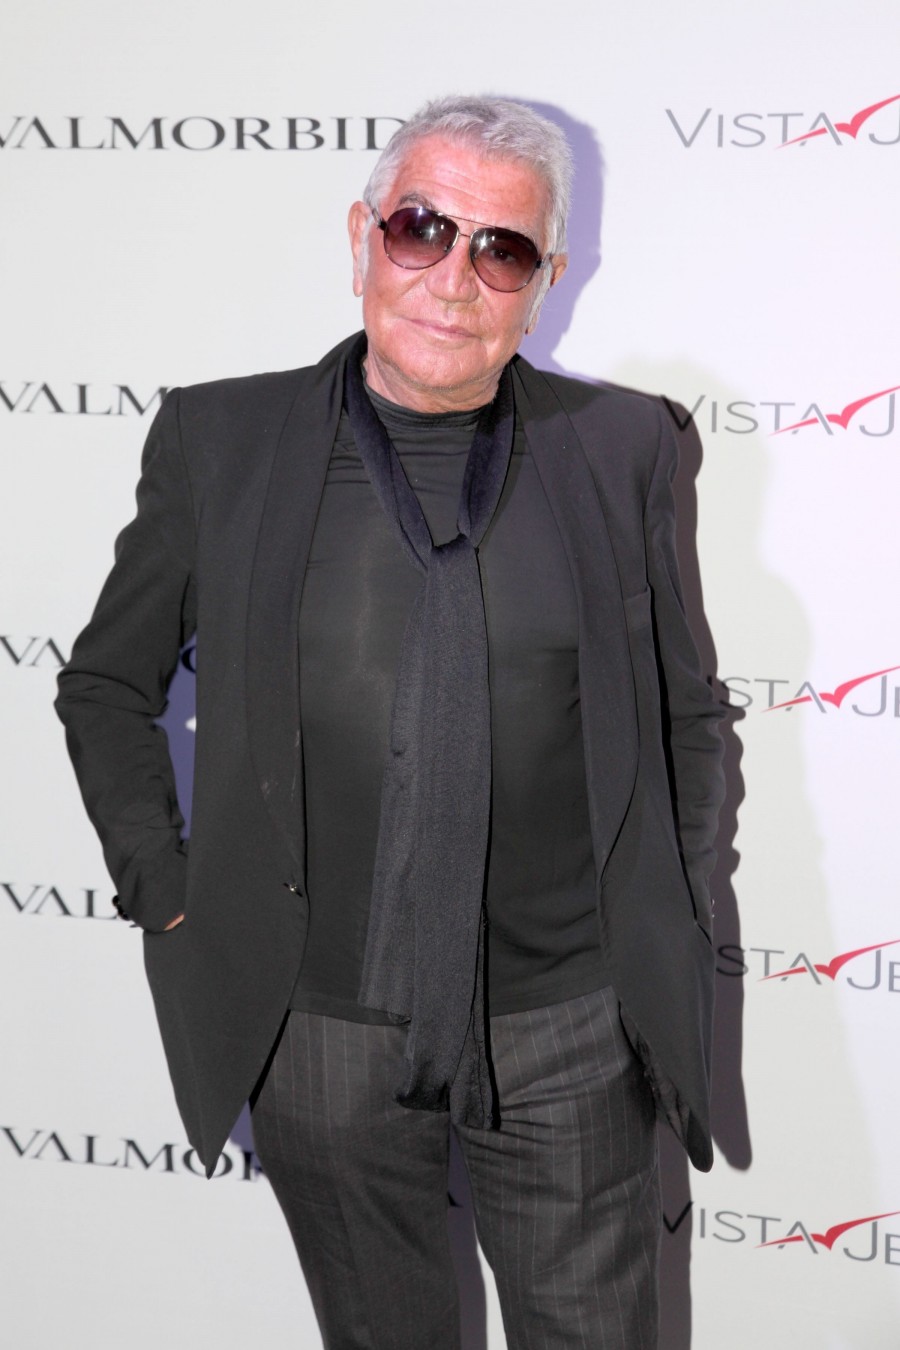 Roberto Cavalli Plans To Sell Off A Majority Stake Of His Brand By Next ...